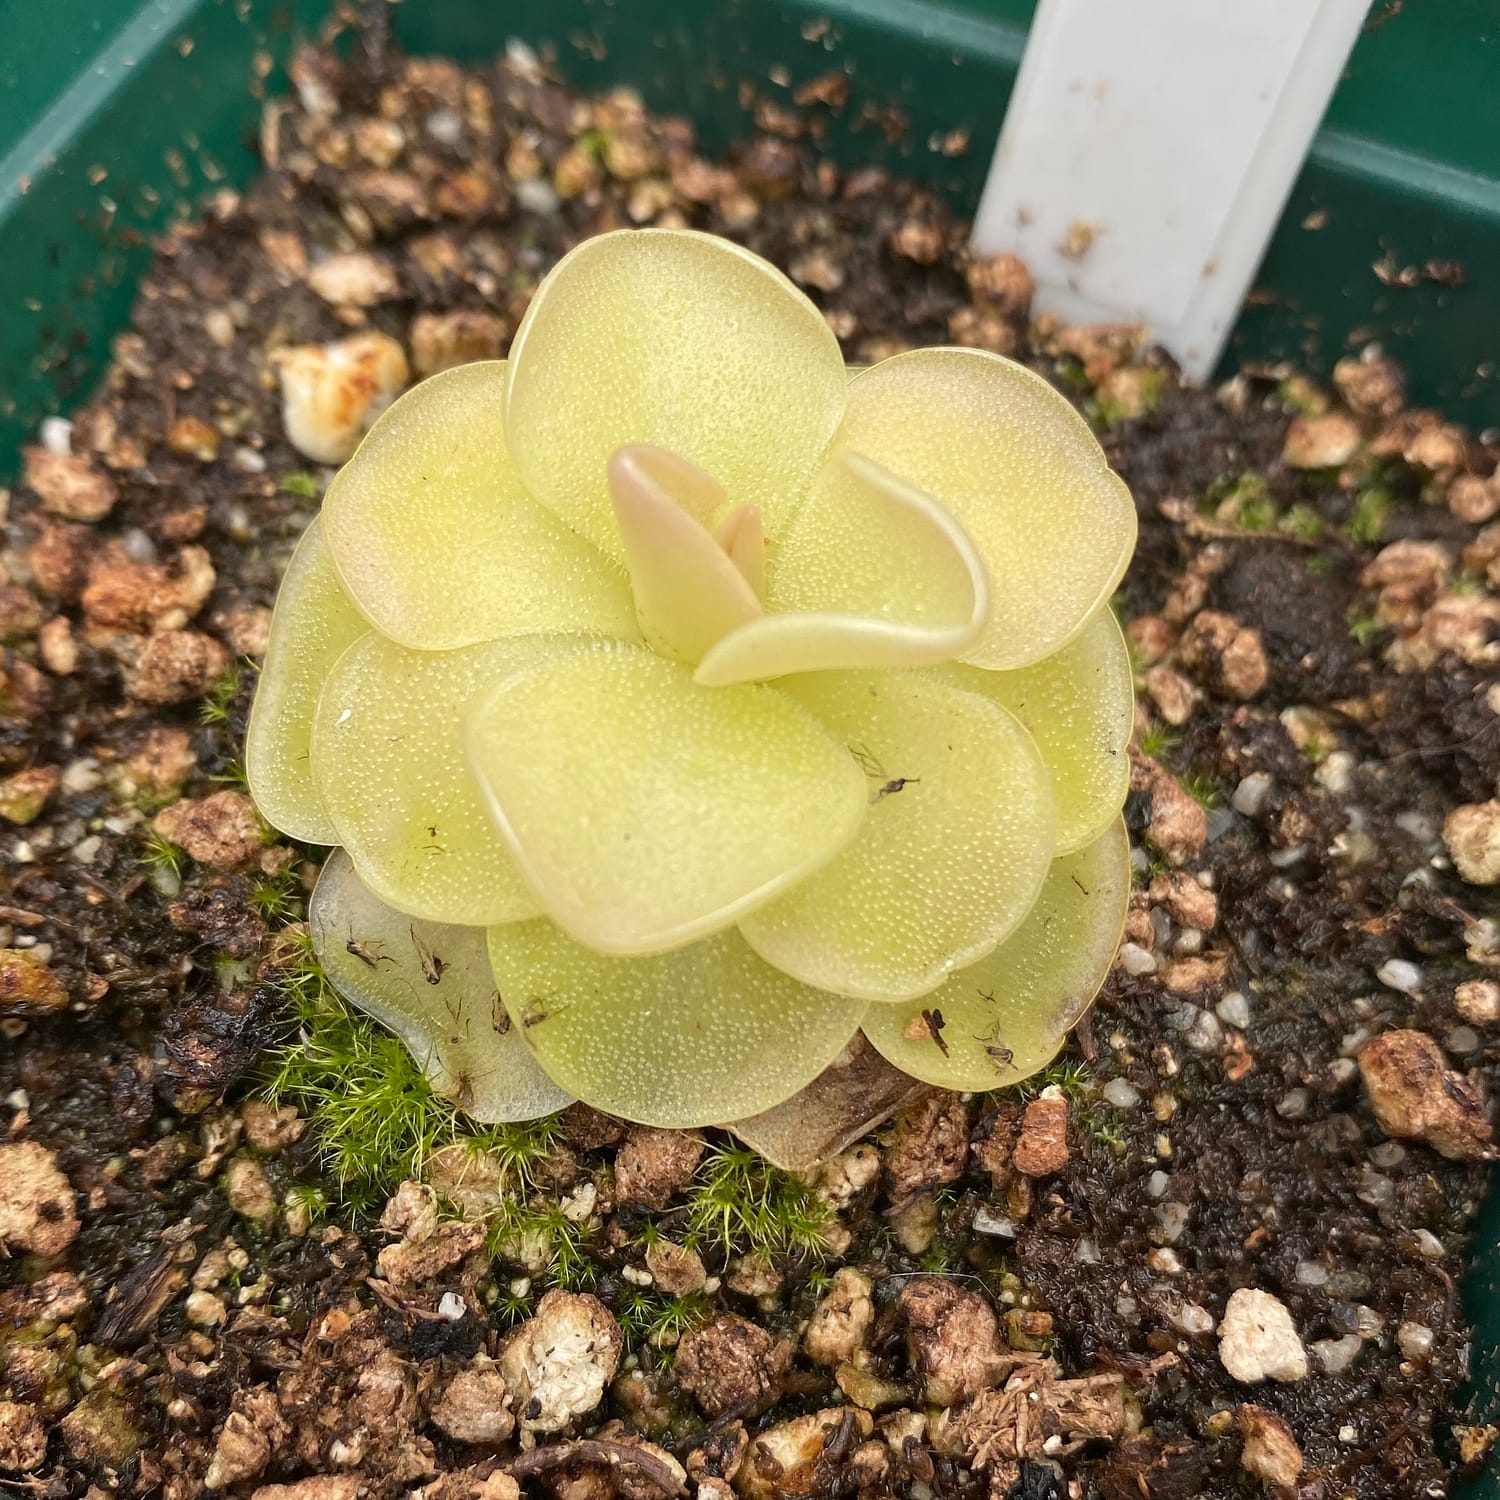 A Pinguicula ‘Sethos’ plant in a black container